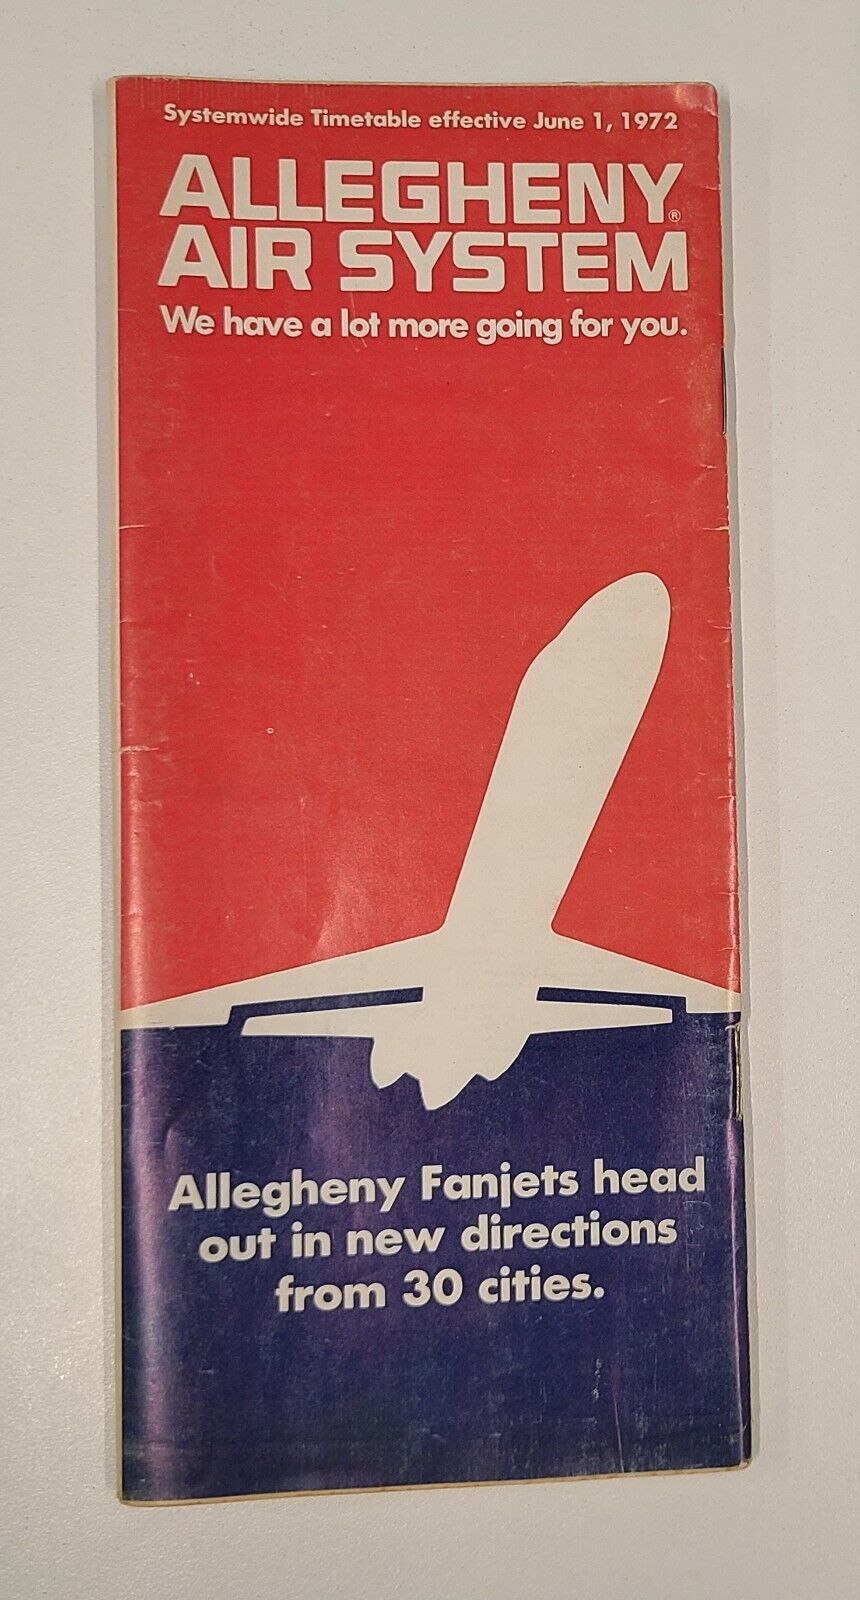 Allegheny Airlines Timetable (1972)